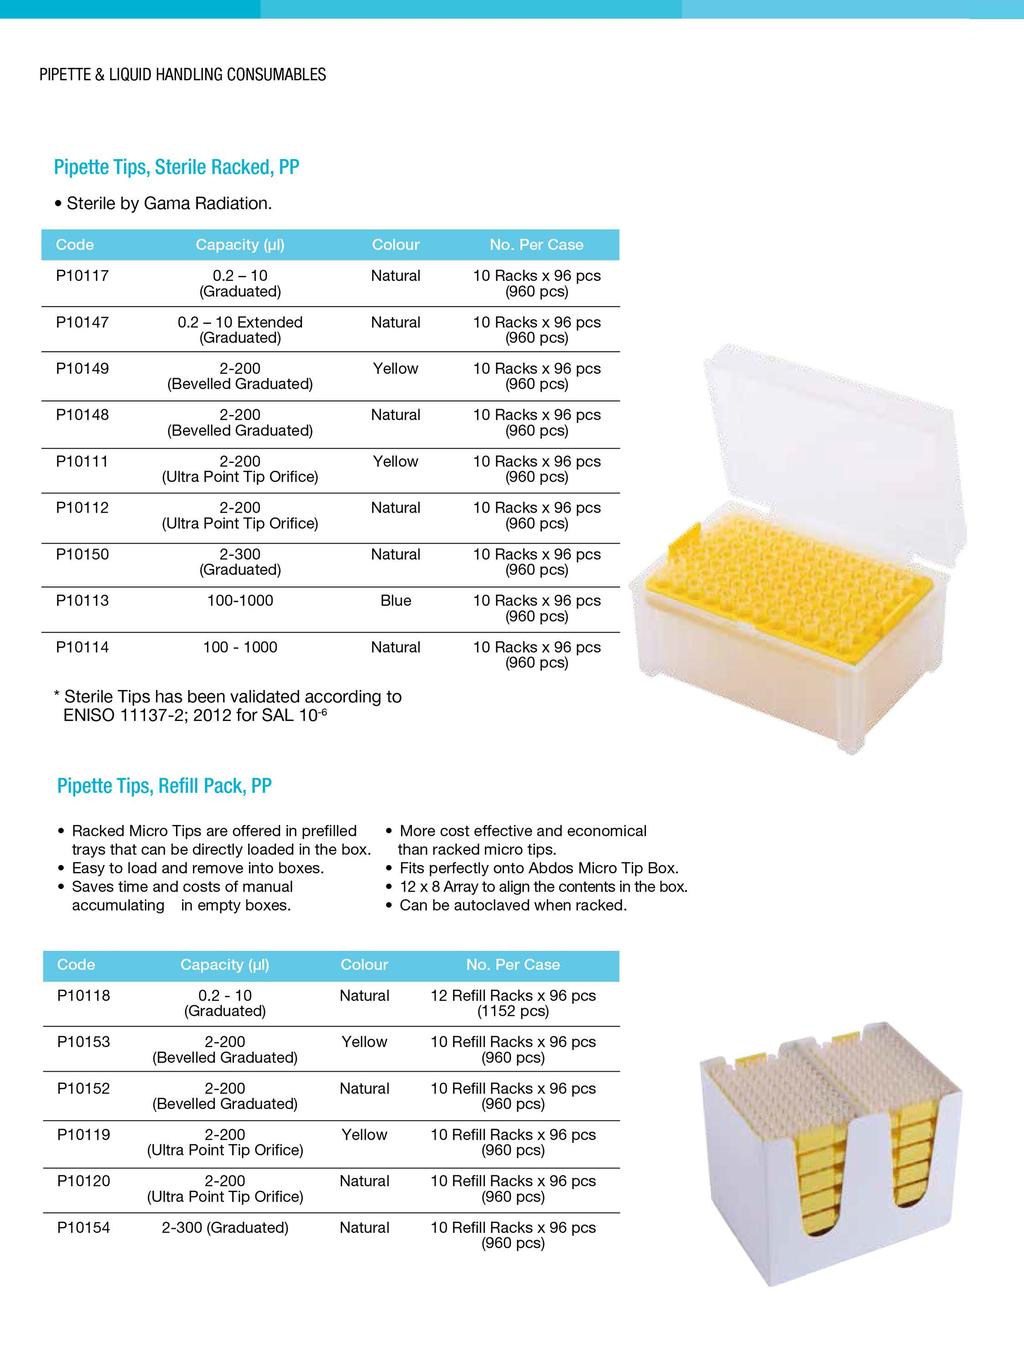 PIPETIE & LIQUID HANDLING CONSUMABLES Pipette Tips, Sterile Racked, PP Sterile by Gama Radiation. Code Capacity (µi) Colour No. Per Case P10117 0.2-10 1 O Racks x 96 pcs P10147 0.